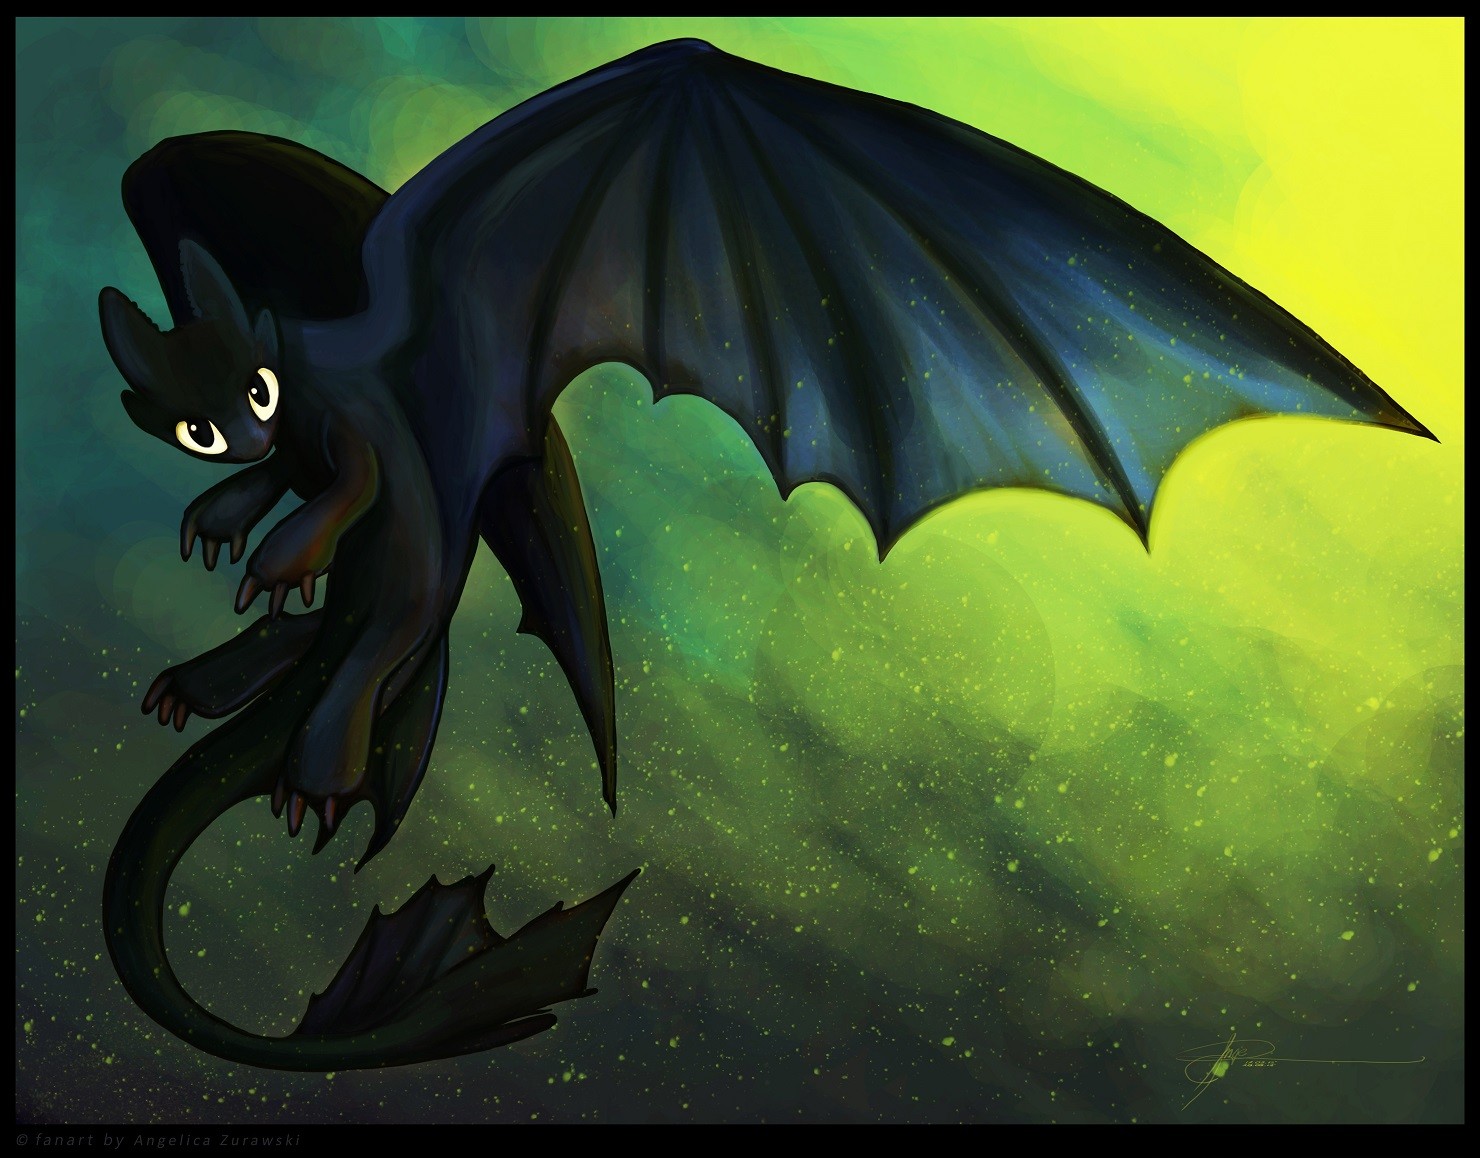 Fan art of Night Fury from DreamWorks animated movie How to Train Your Drag...